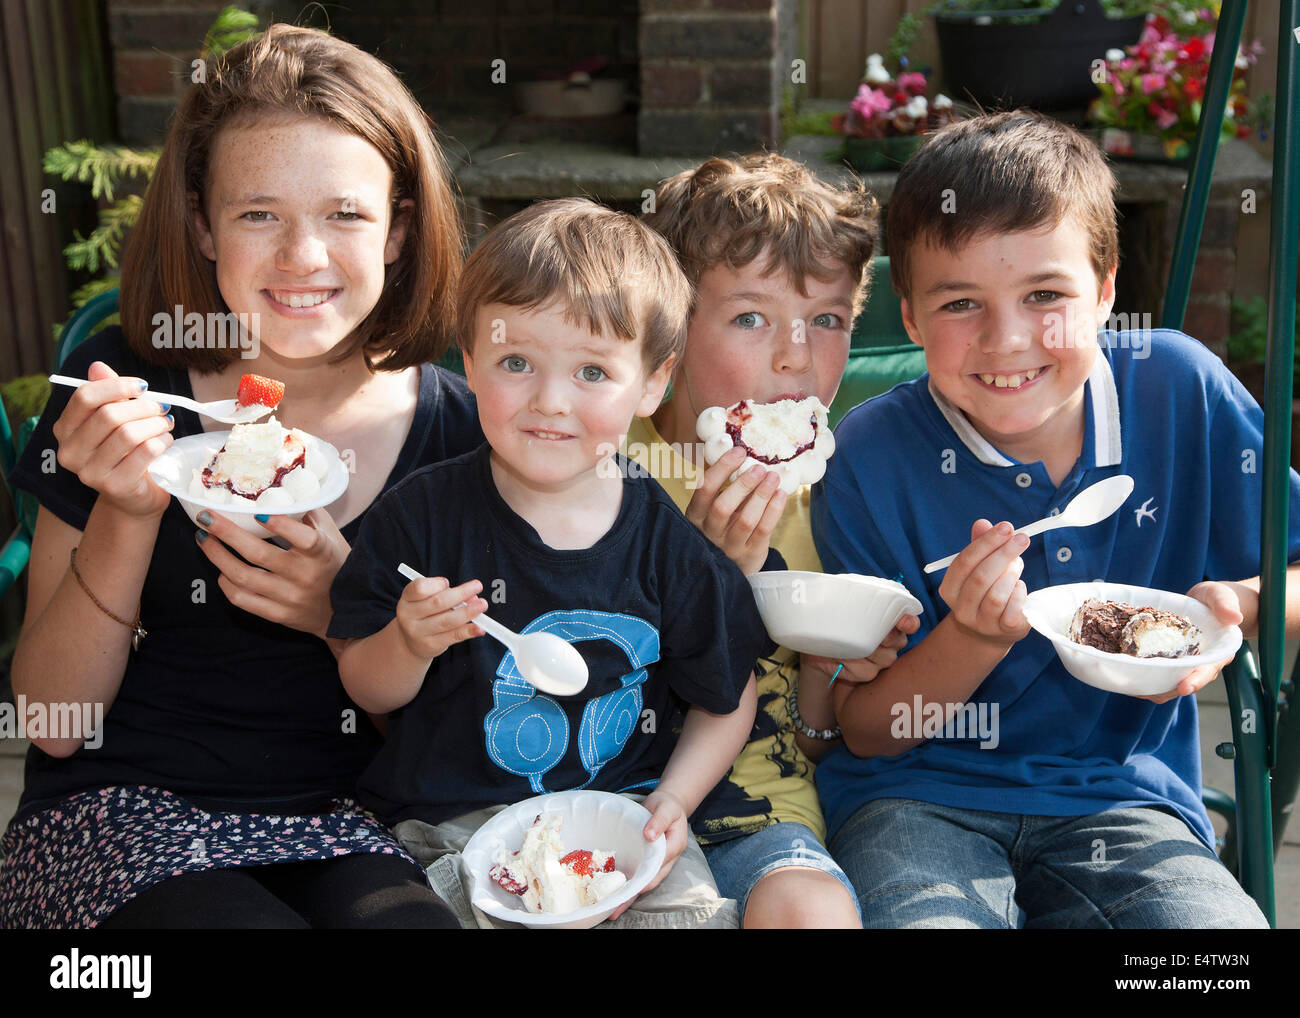 Children eating ice cream and cakes at a family party Stock Photo